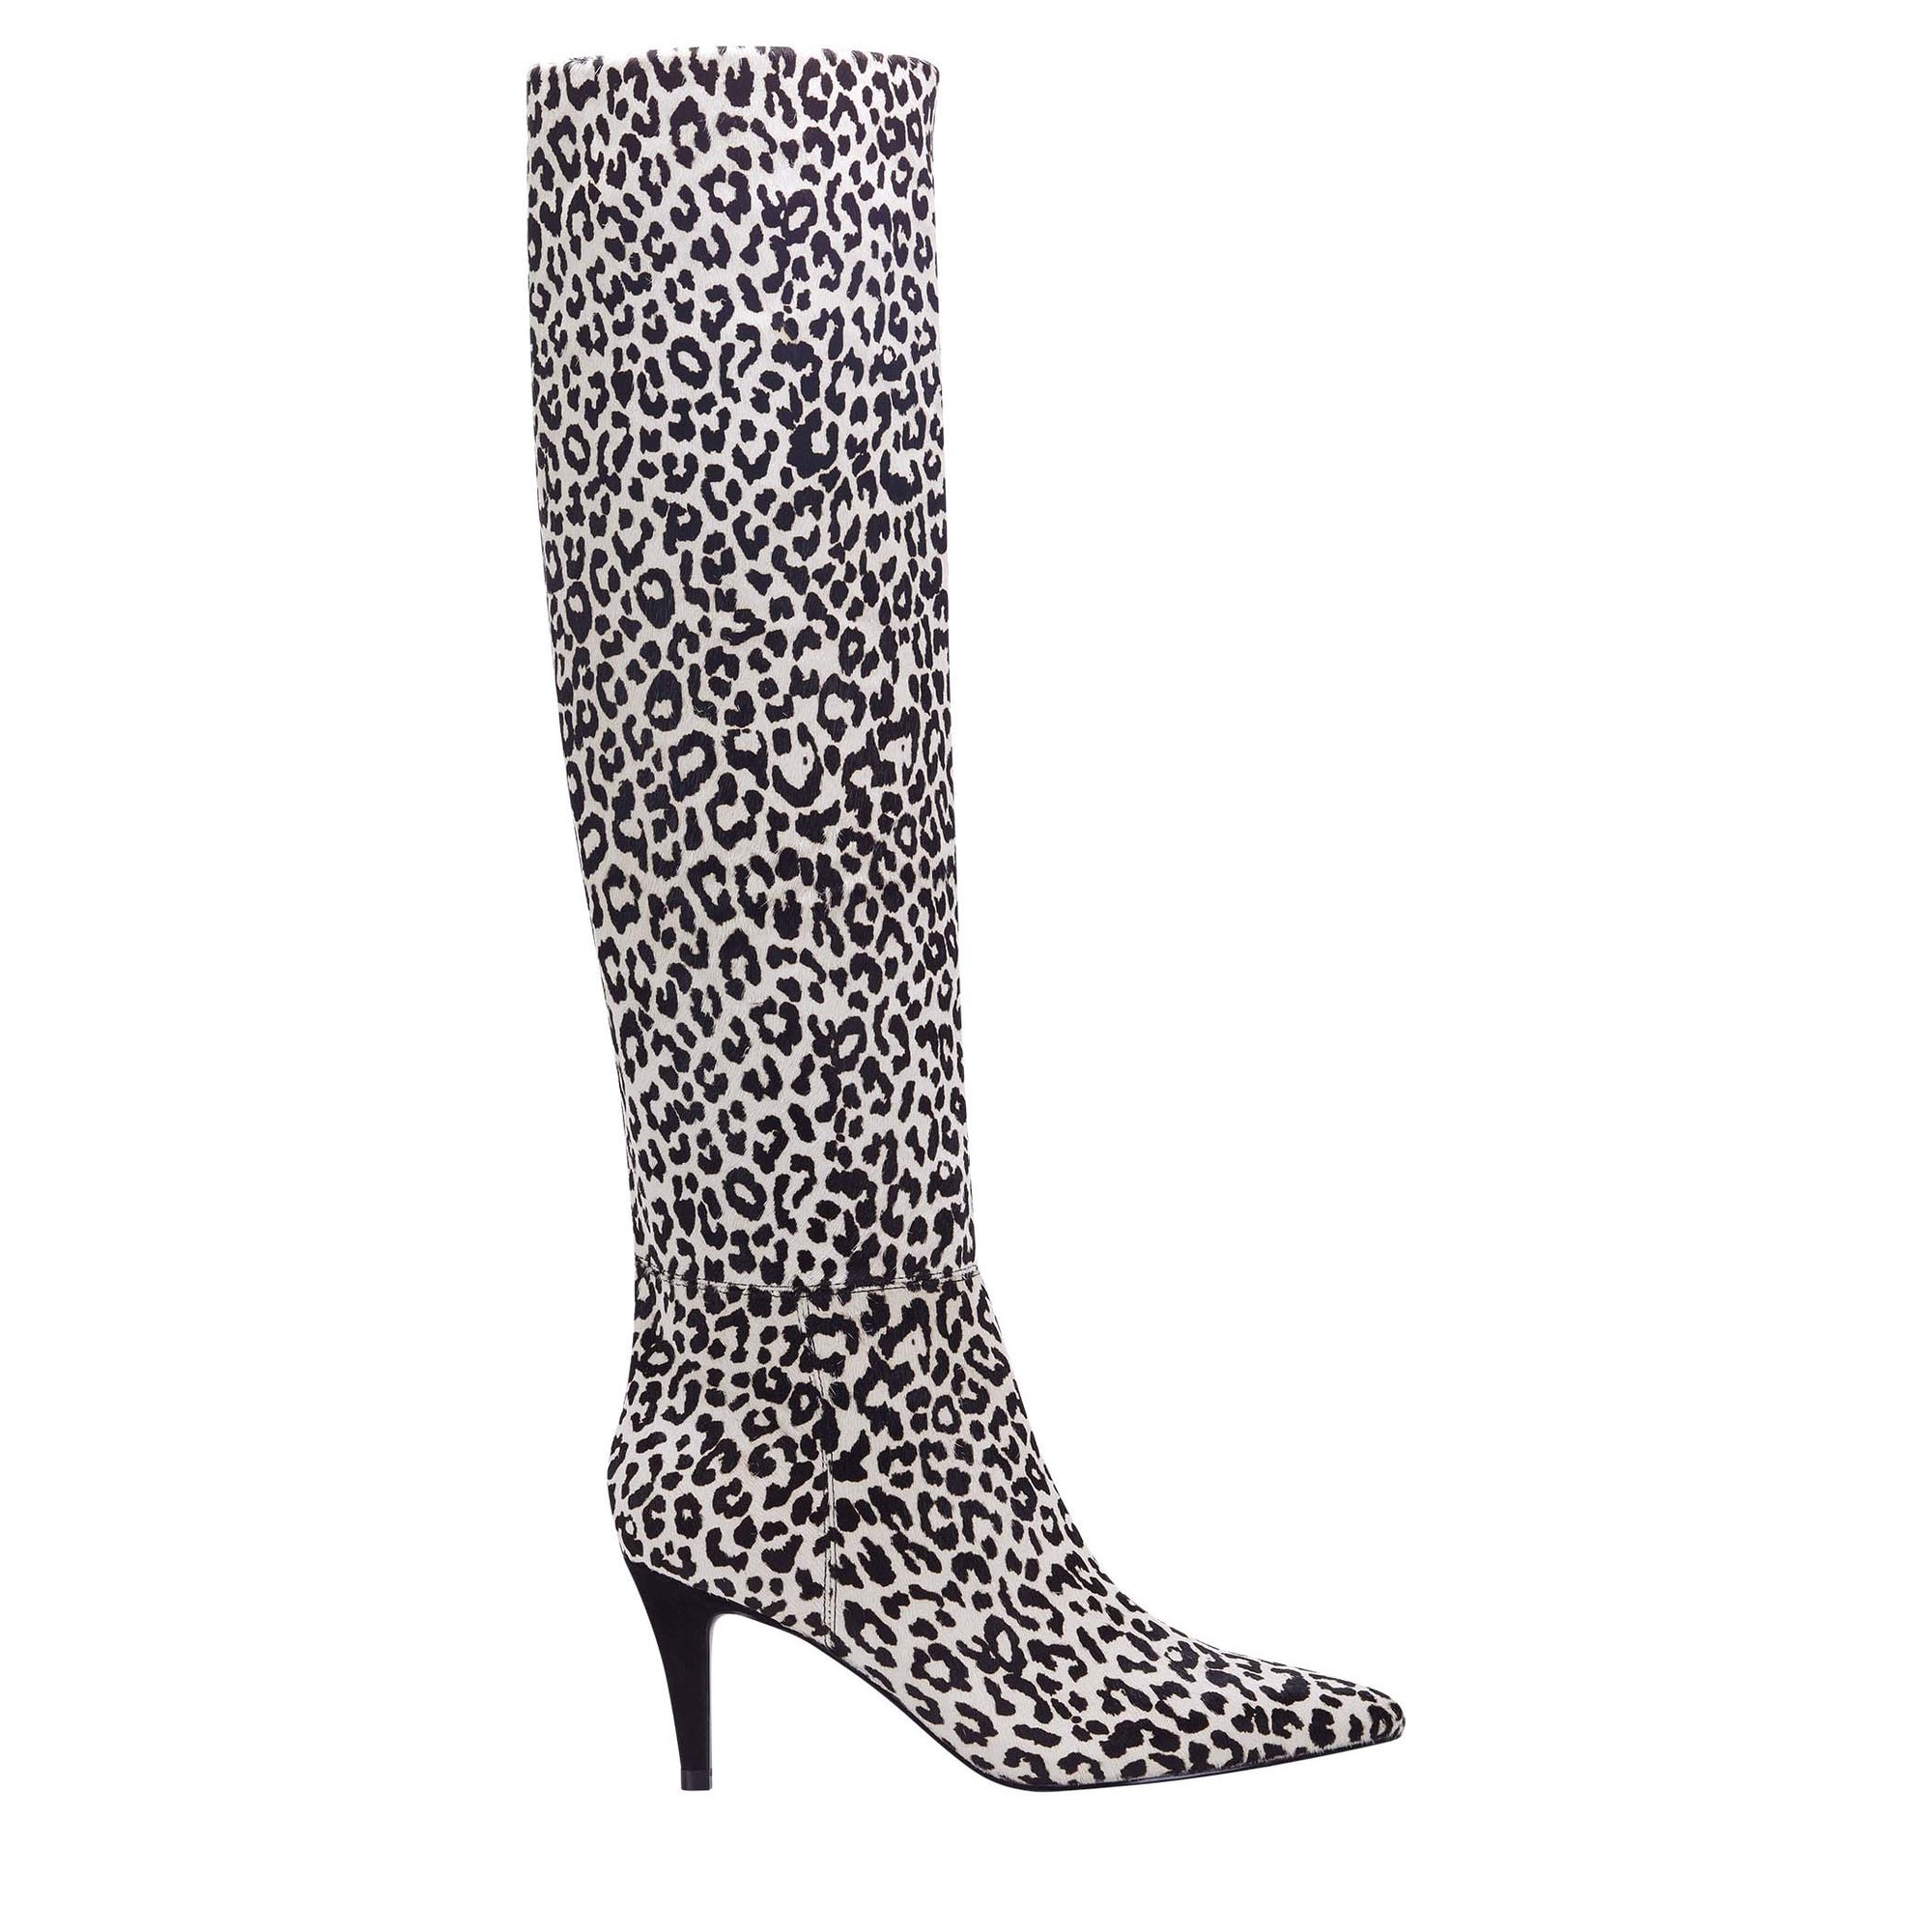 marc fisher leopard boots